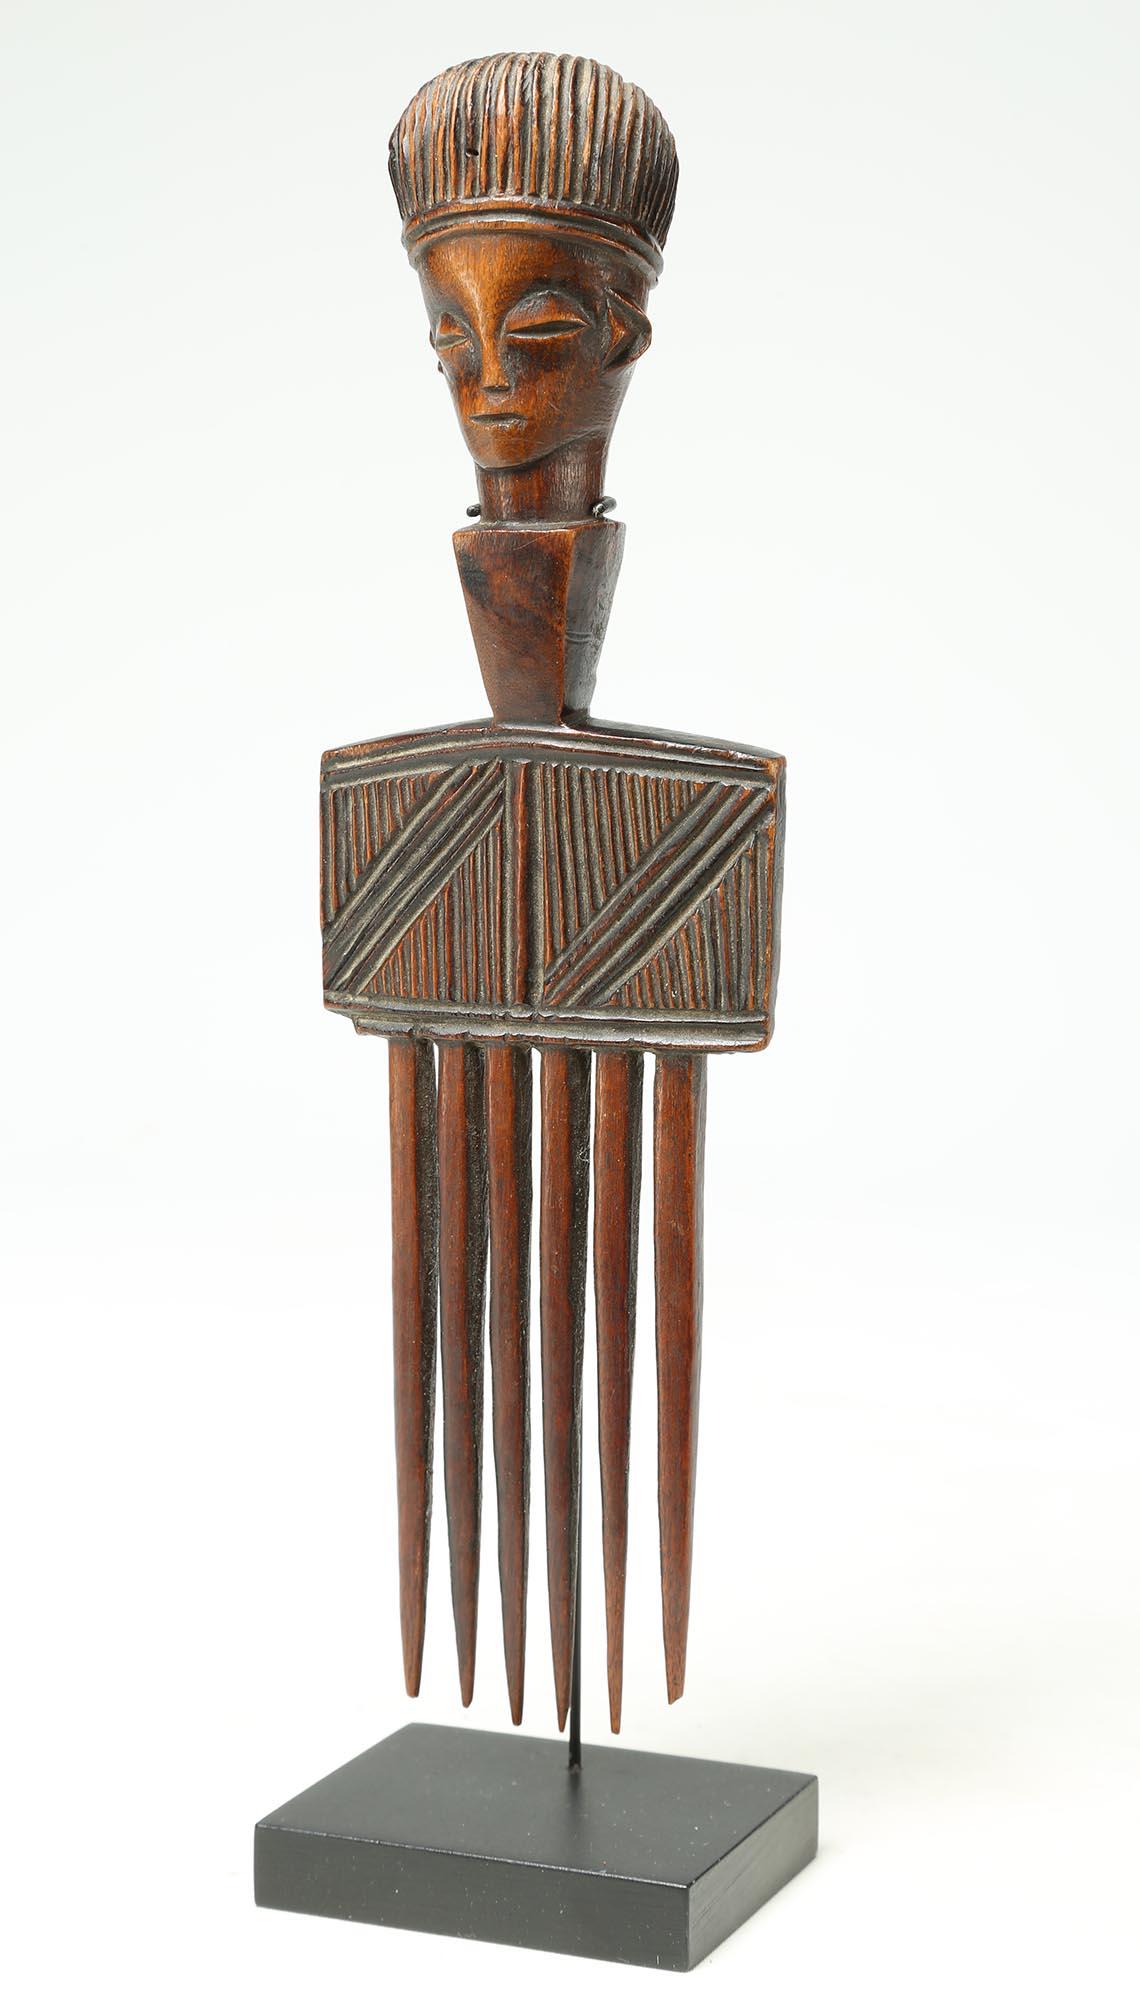 Finely Carved Wood Luena Comb, Great Hair Early 20th Century African Tribal Art In Good Condition For Sale In Santa Fe, NM